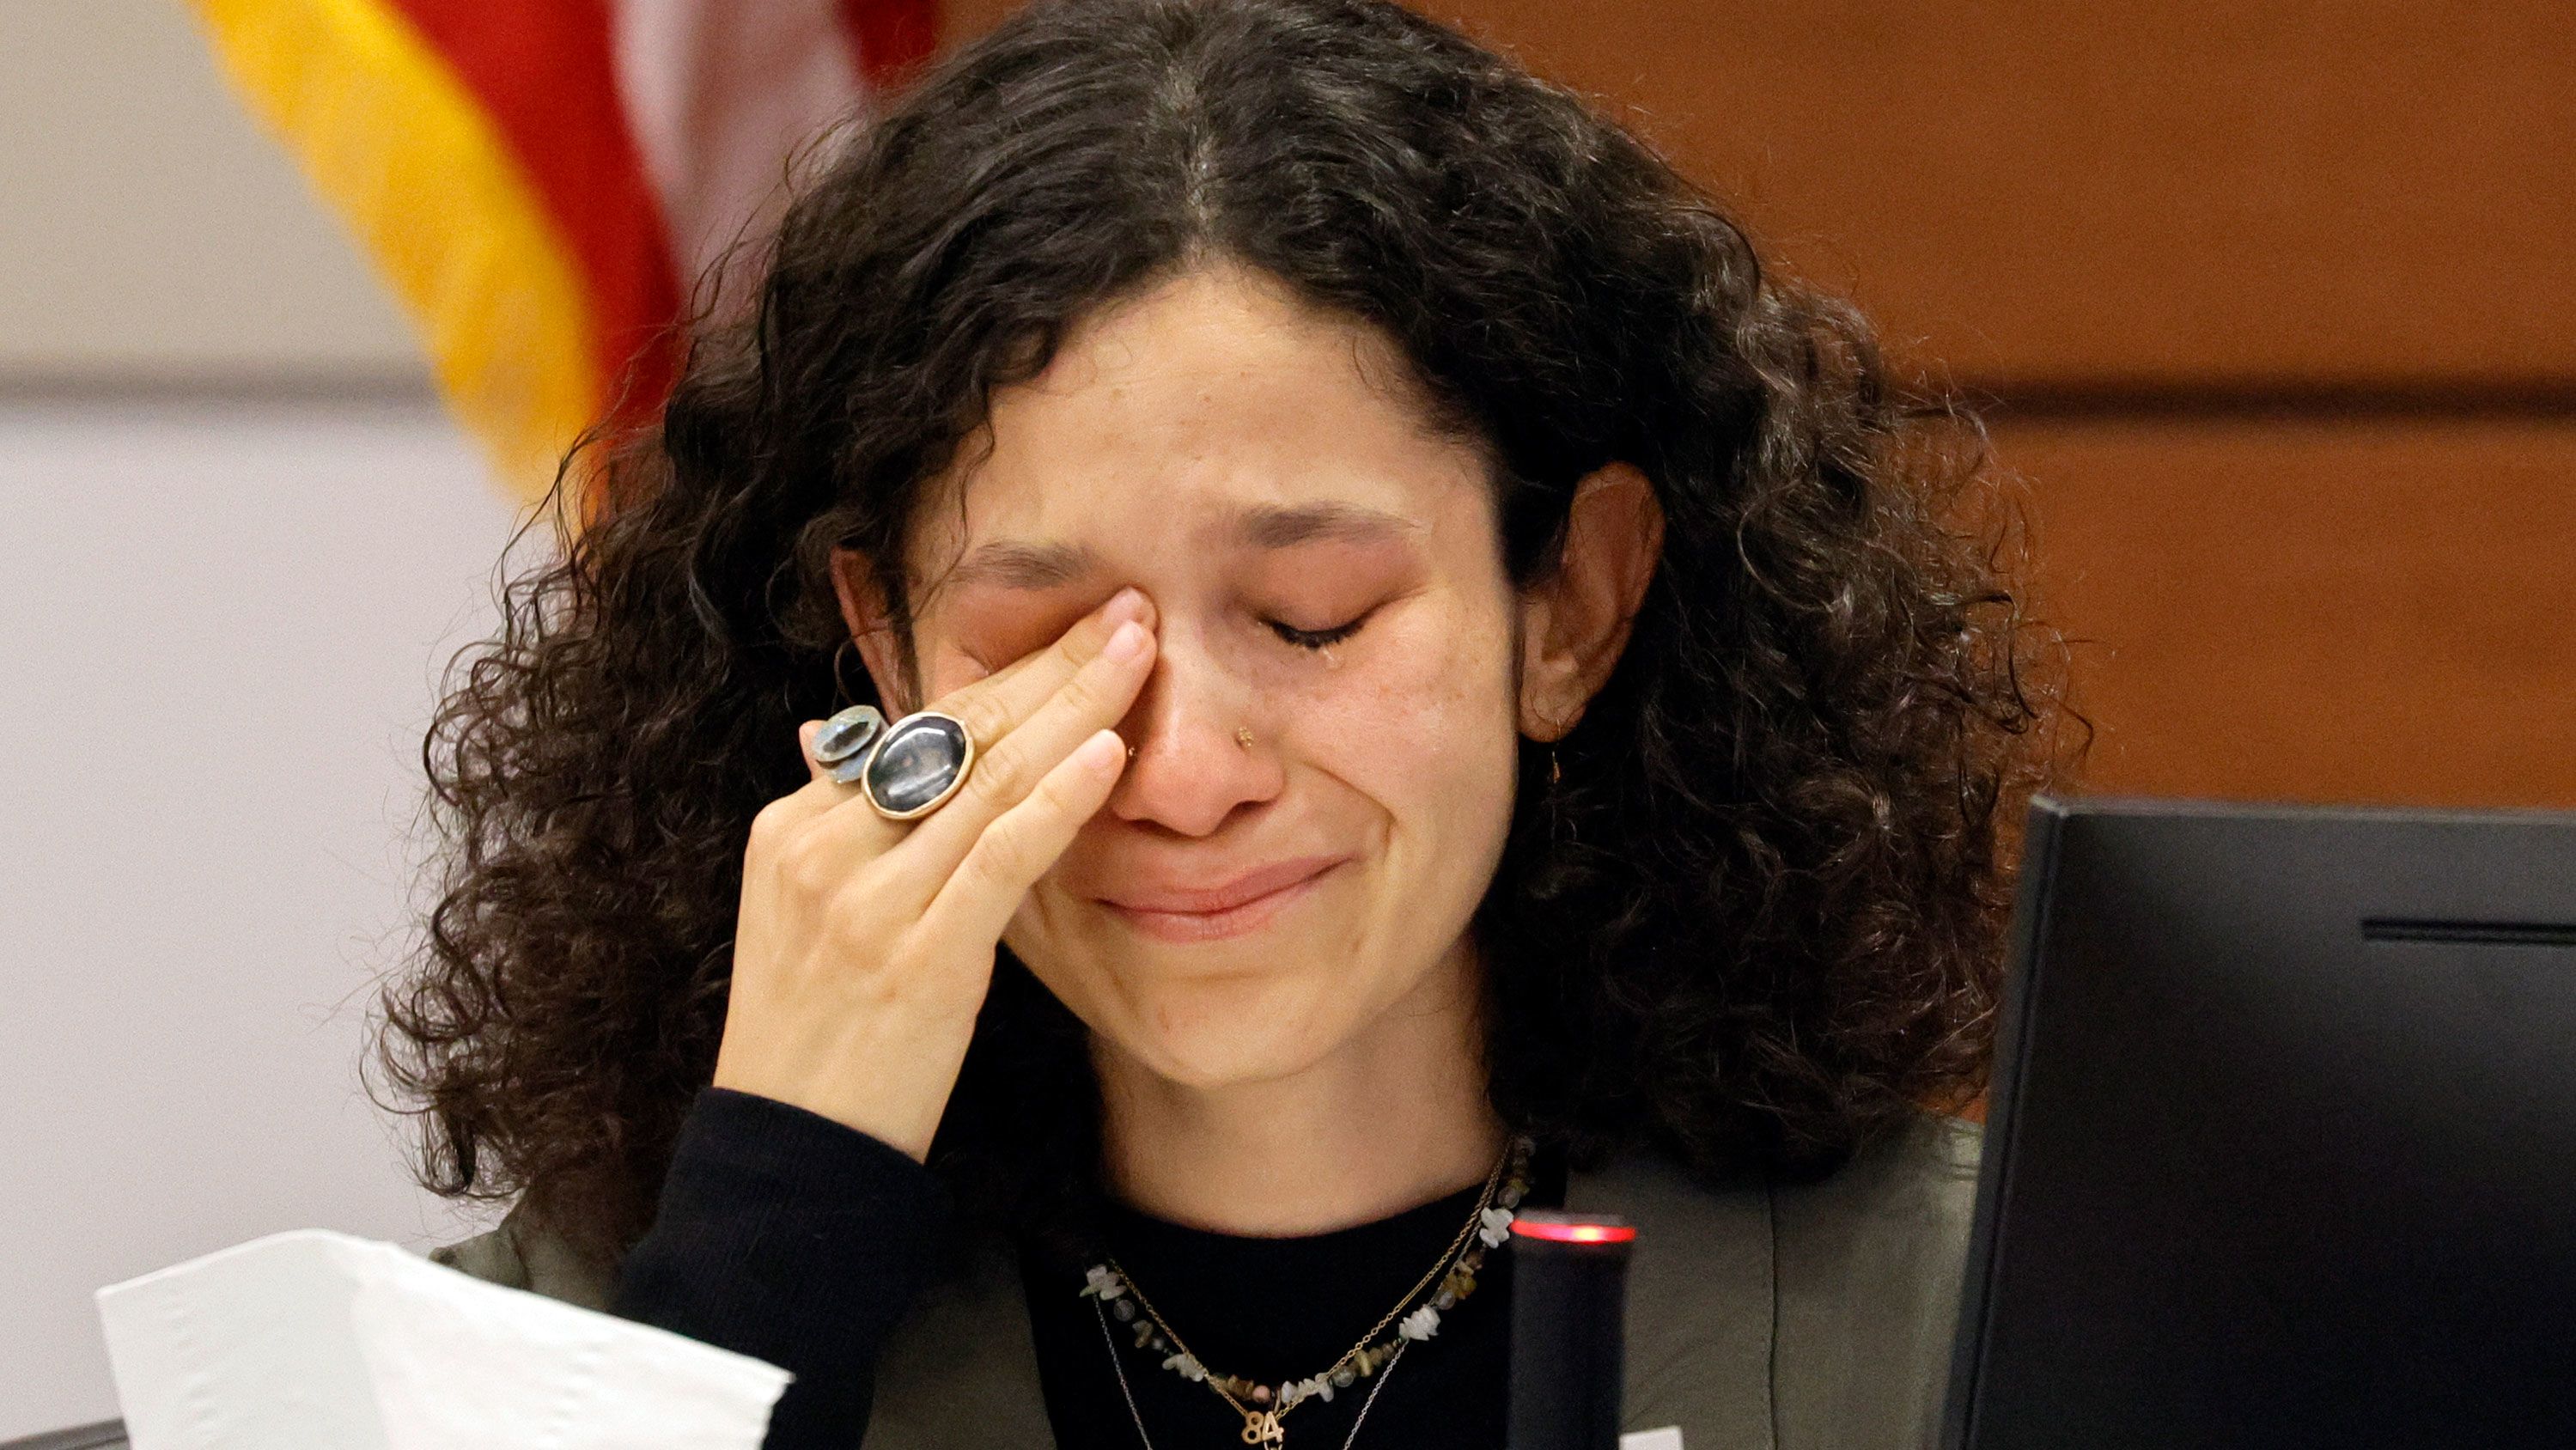 Victoria Gonzalez, who has been called Joaquin Oliver's girlfriend but said they called themselves "soulmates," wipes away tears as she gives her victim impact statement.